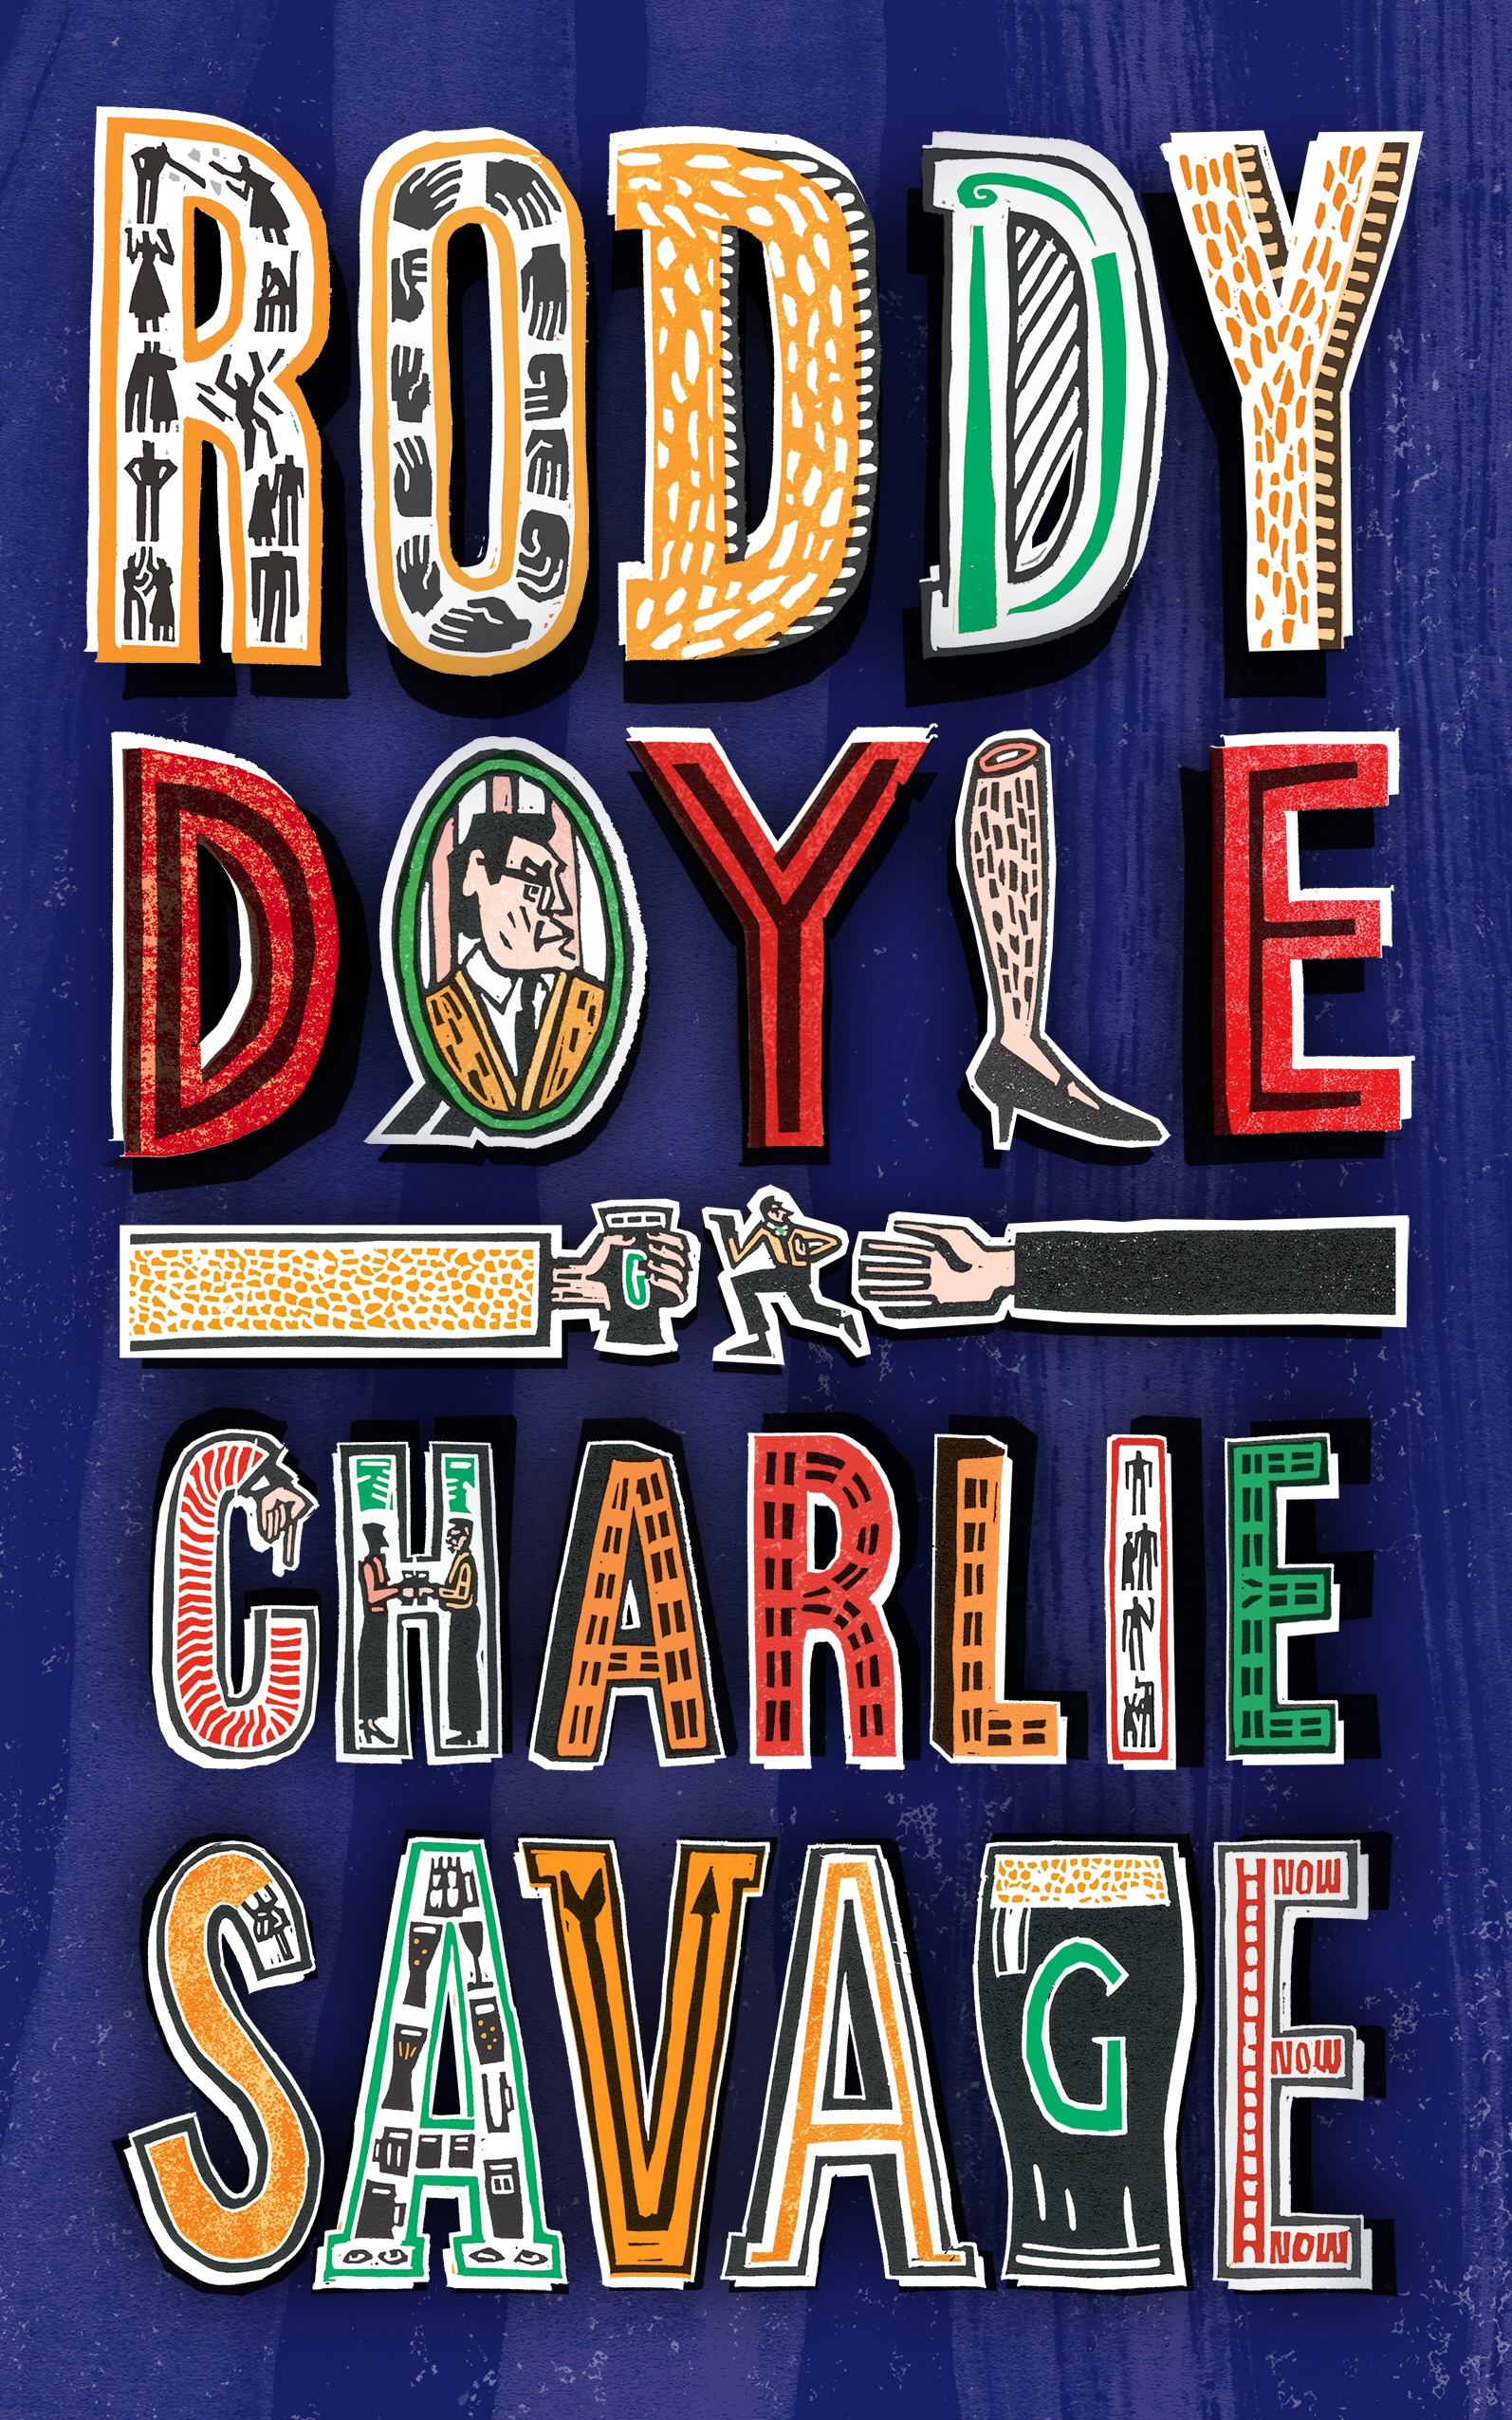 Book “Charlie Savage” by Roddy Doyle — March 7, 2019